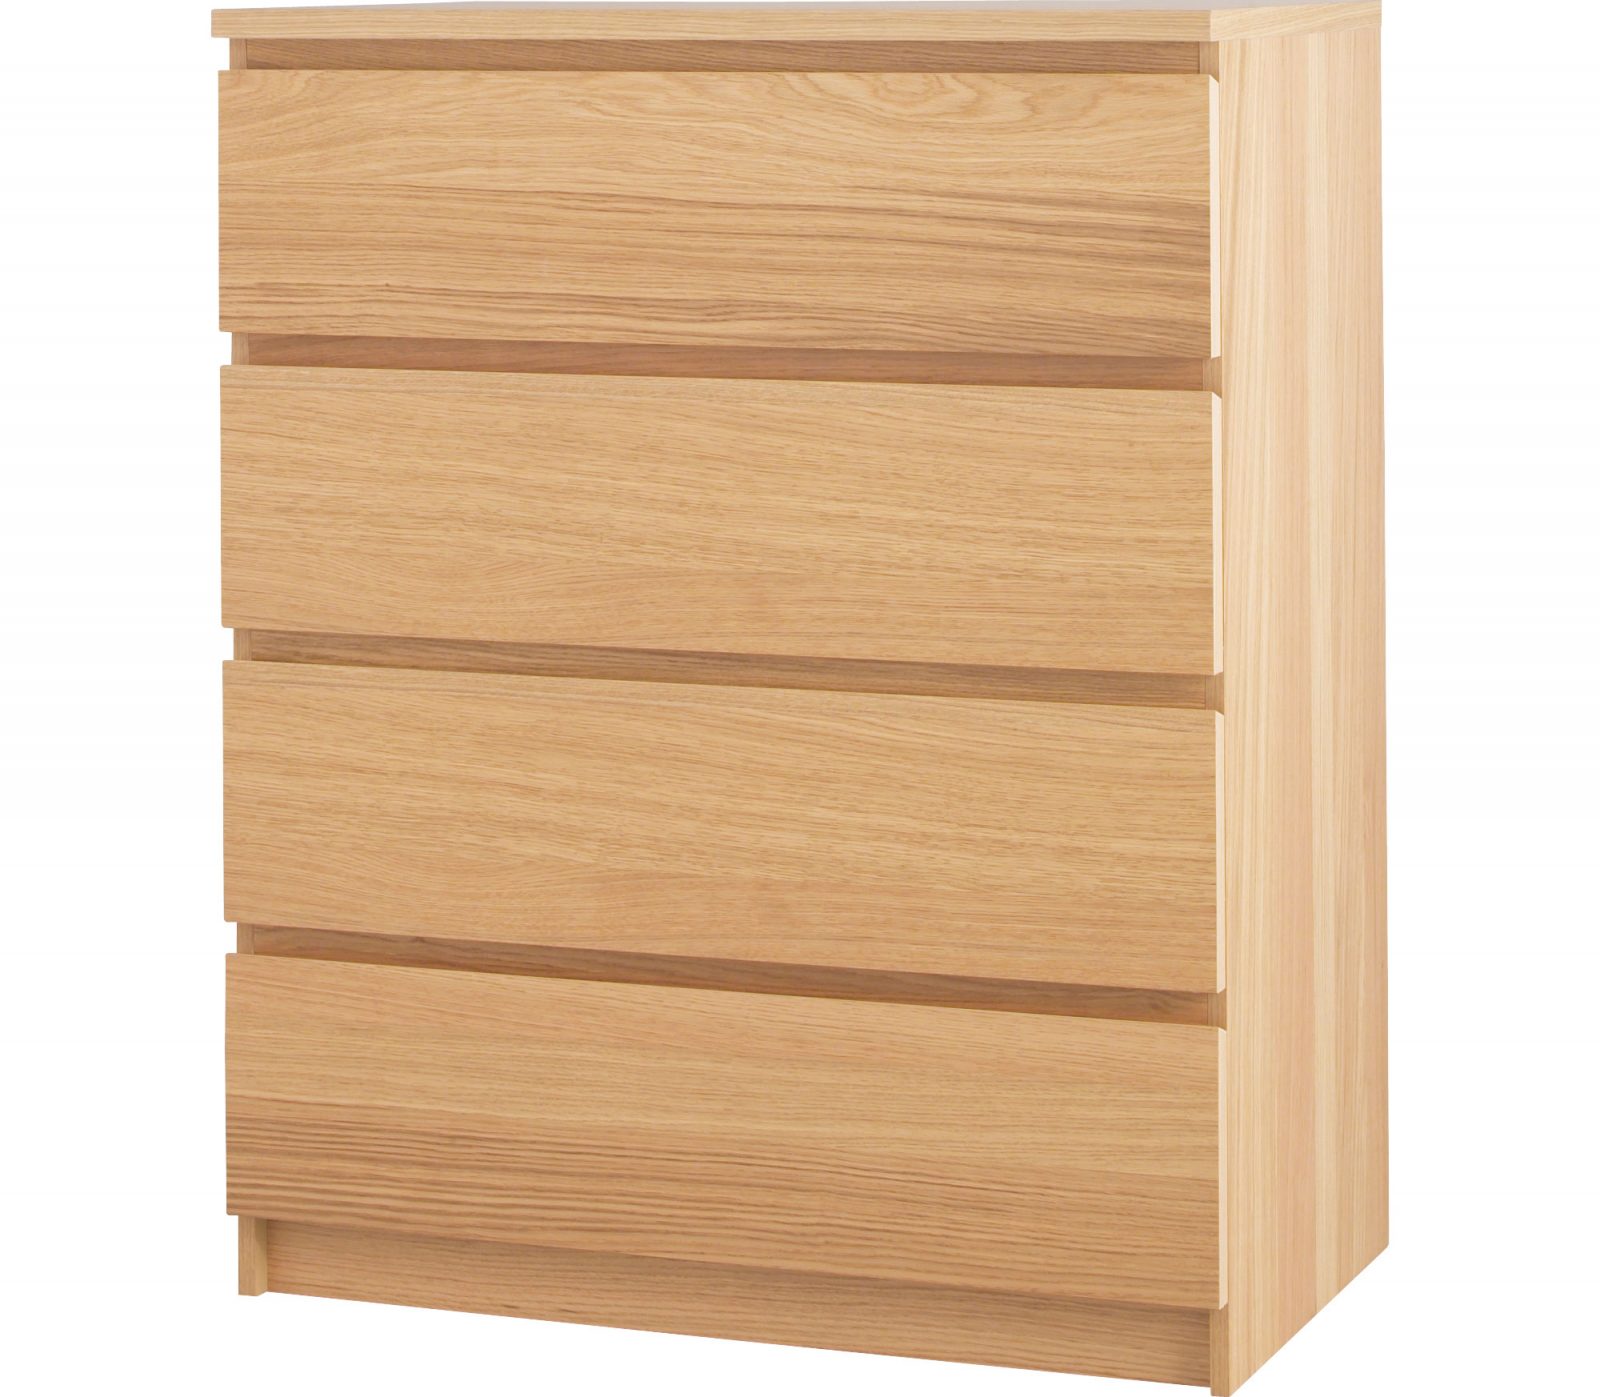 Blond wooden chest of drawers made in a simple design, MALM.